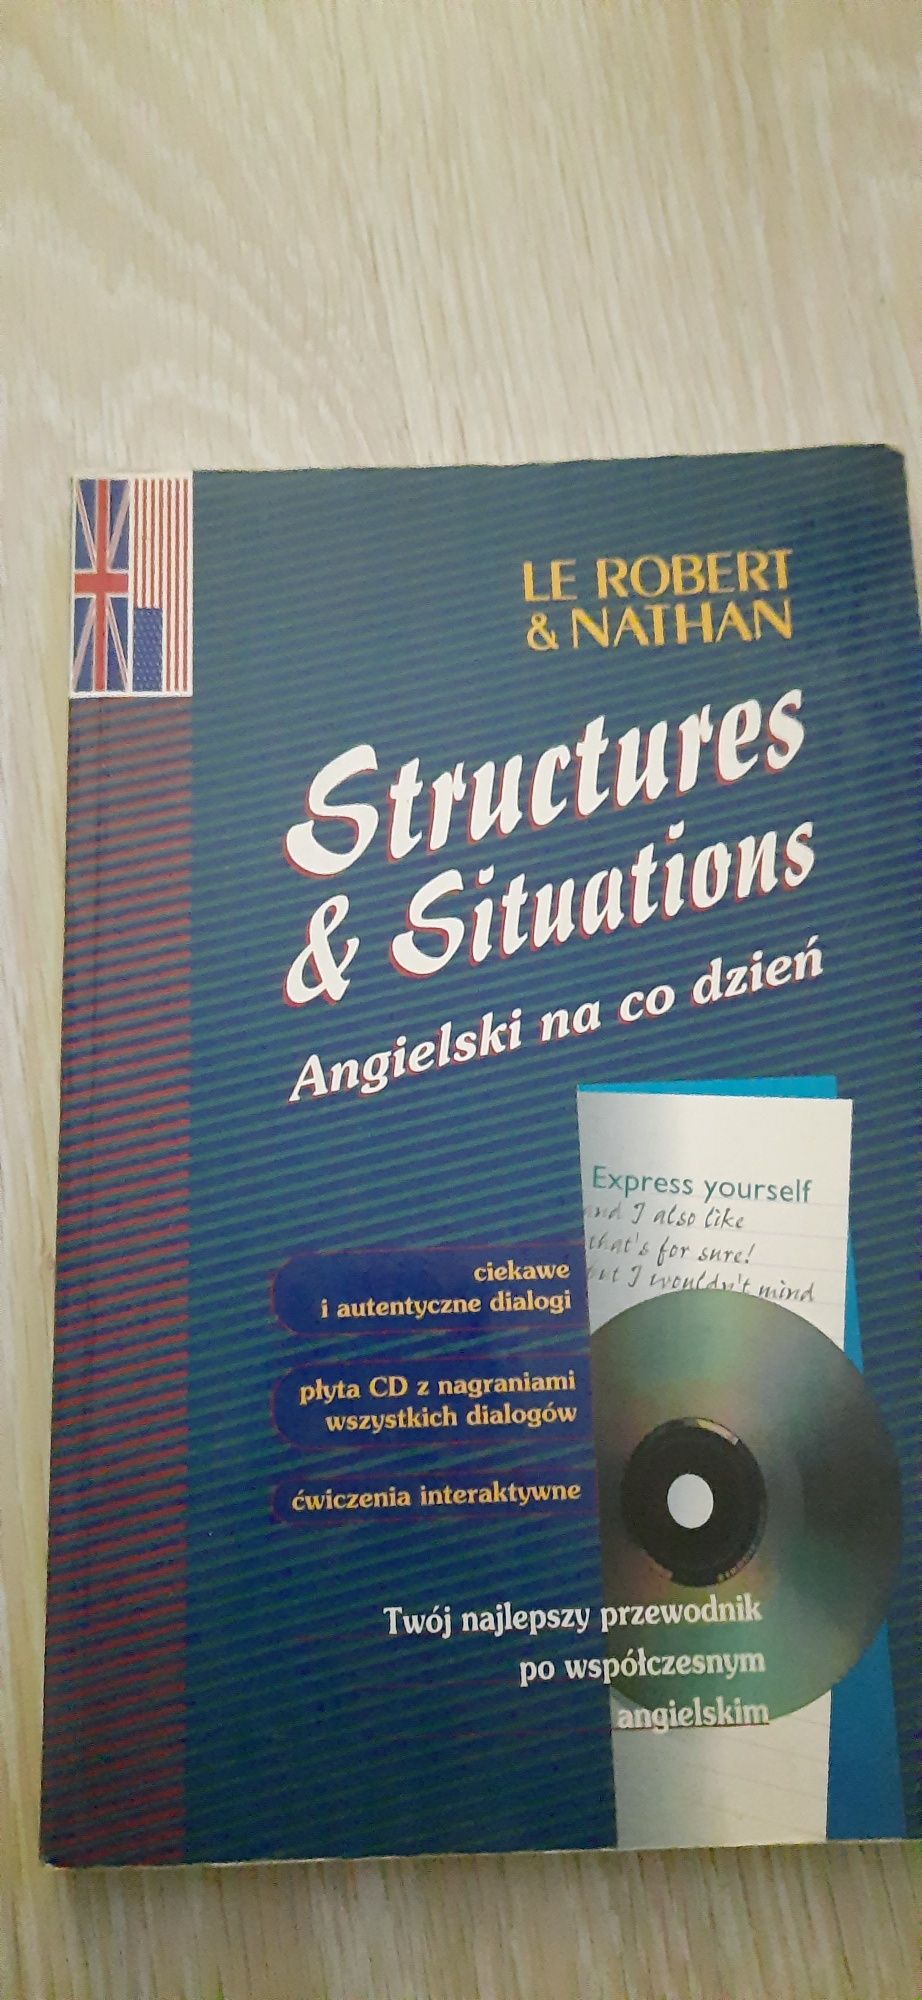 Structures & Situations Le Robert & Nathan Angielski na co dzien